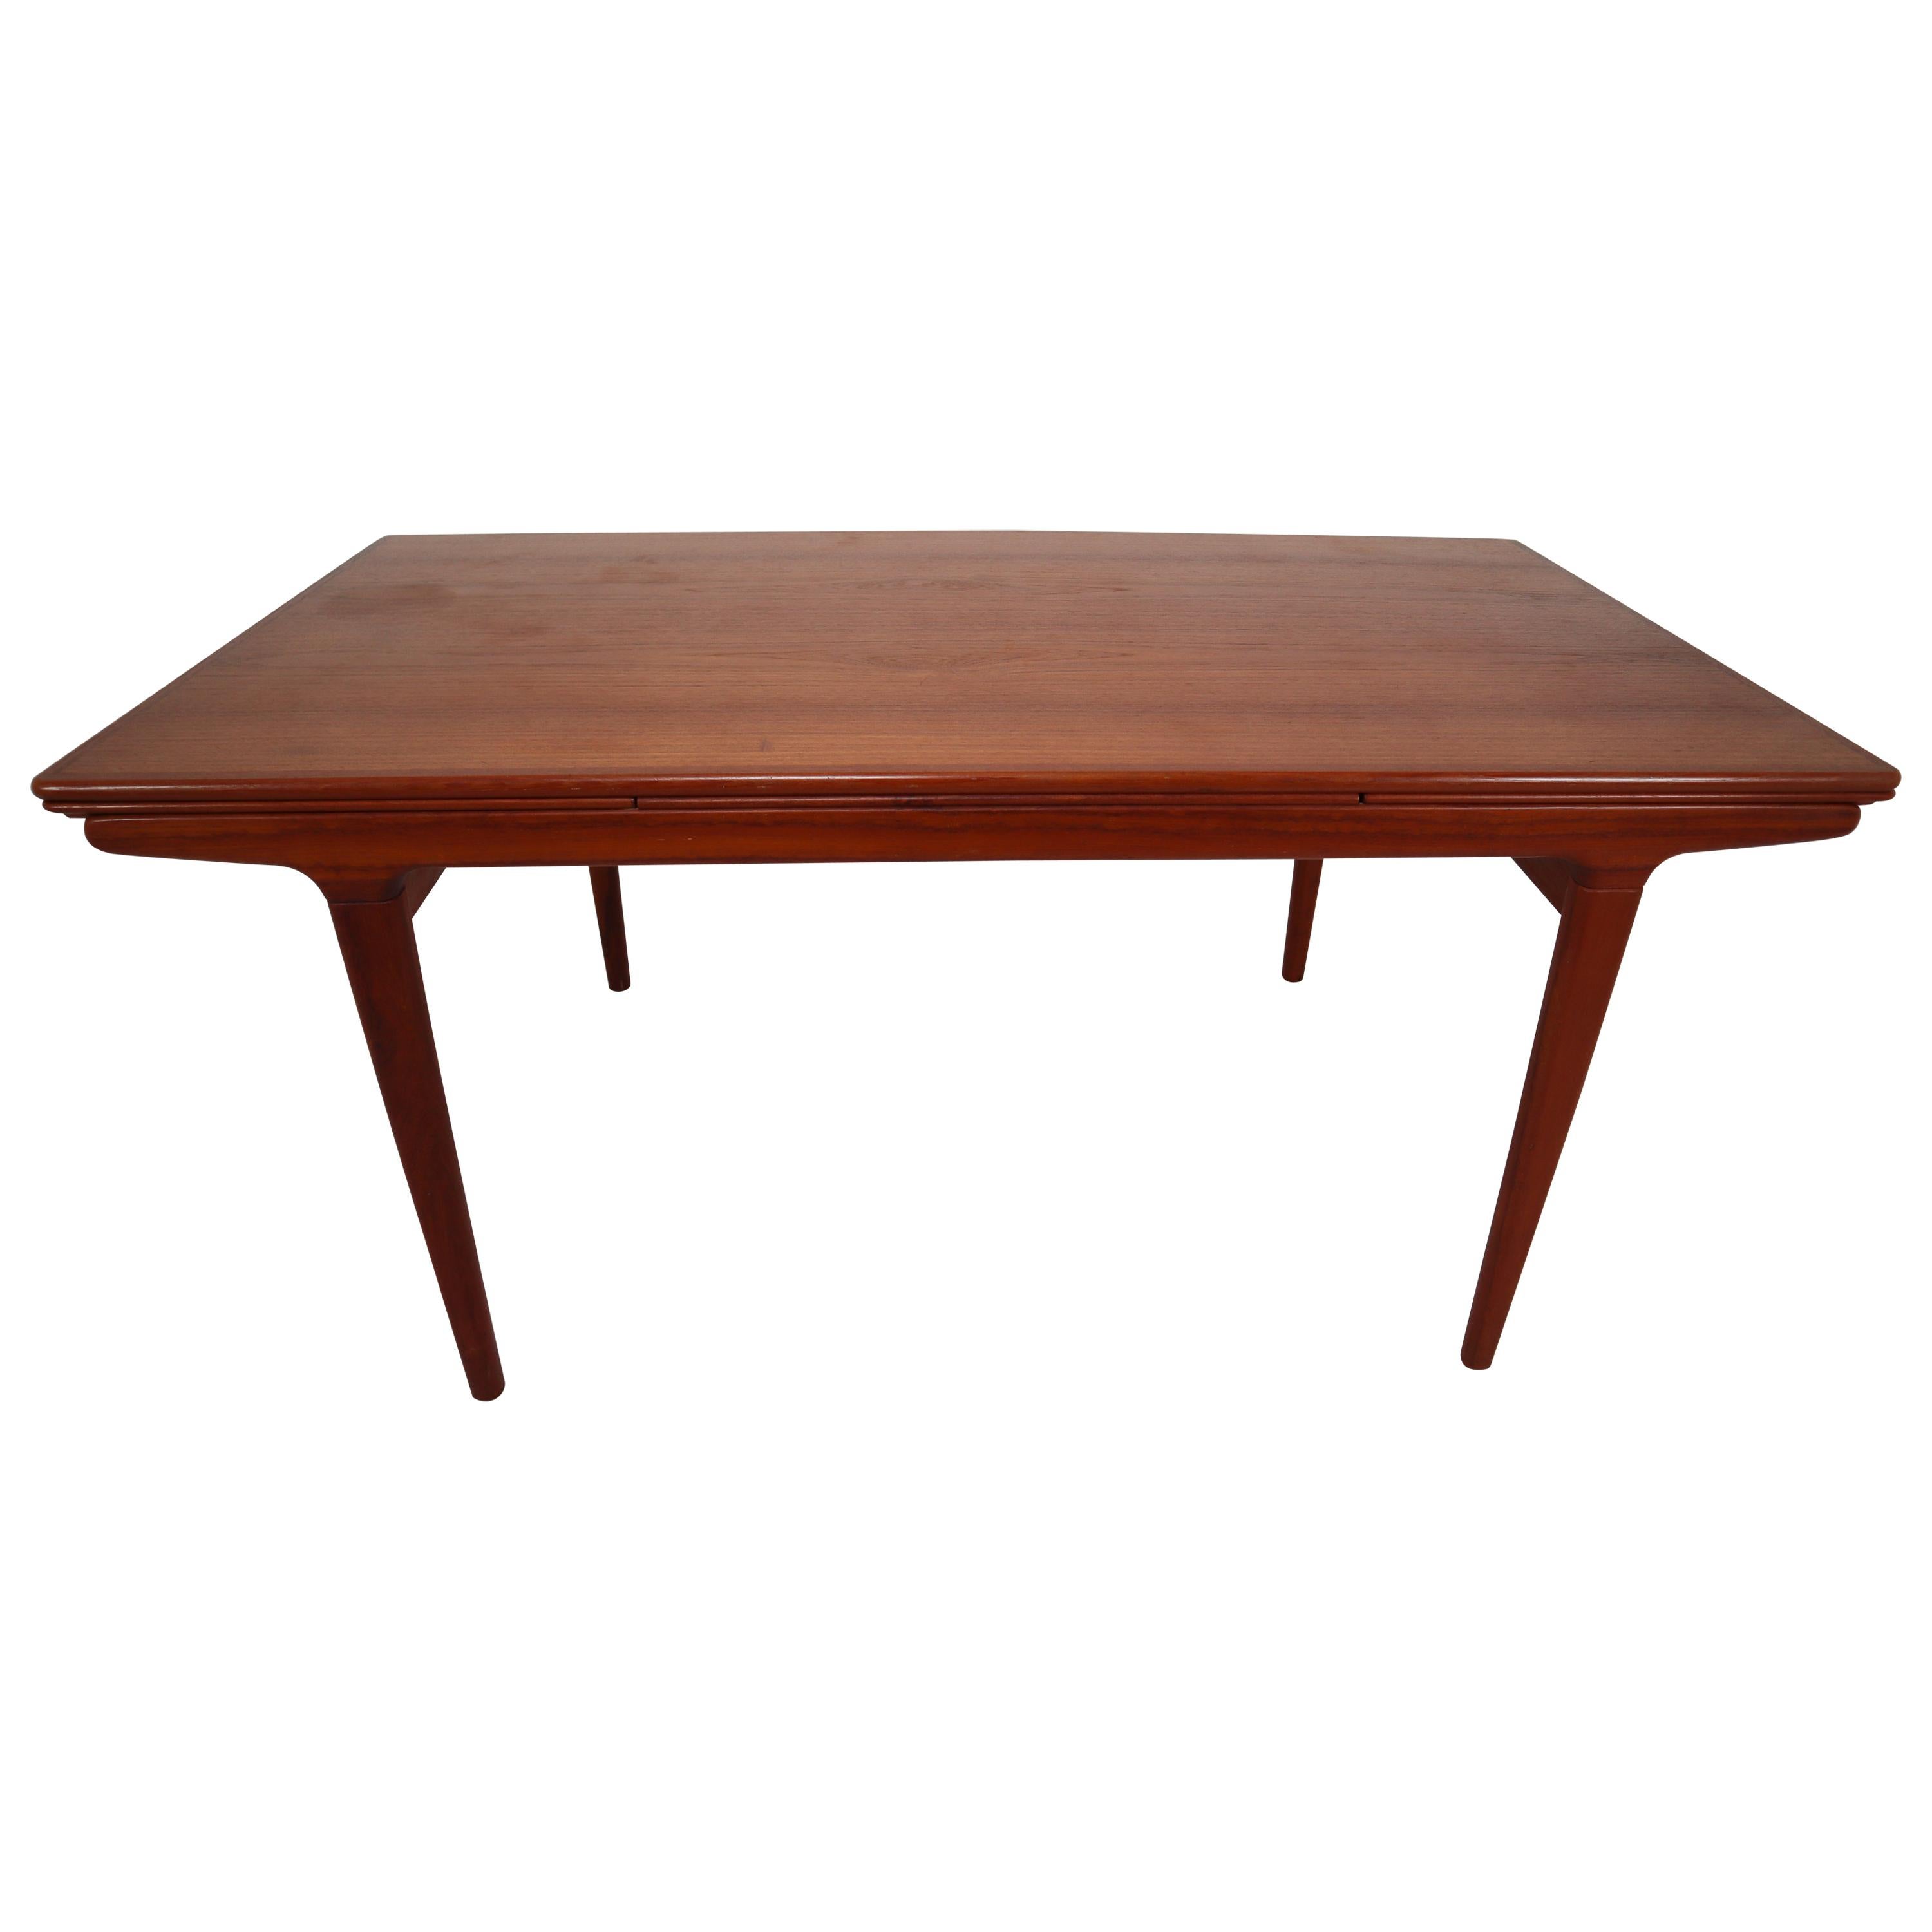 Midcentury Teak Dining Table with Extensions by Niels Møller, Denmark, 1950s